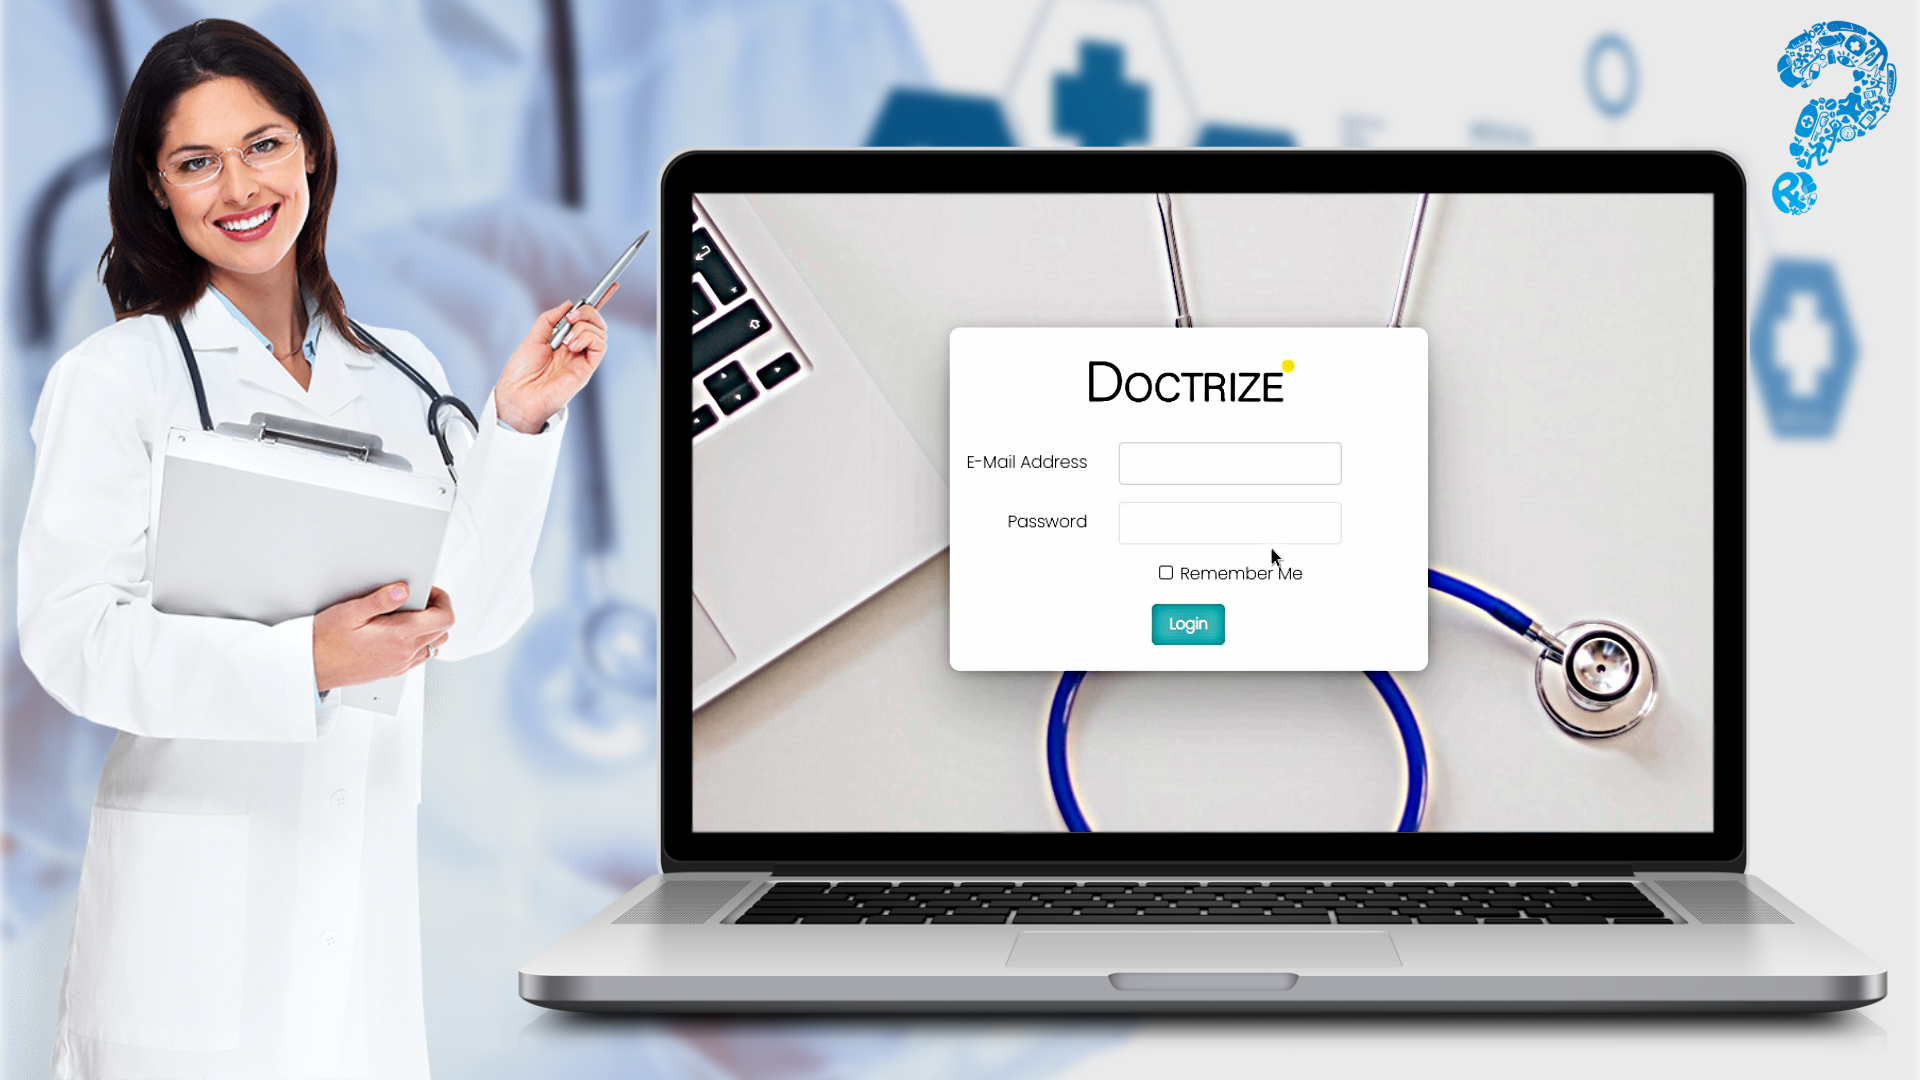 Doctrize